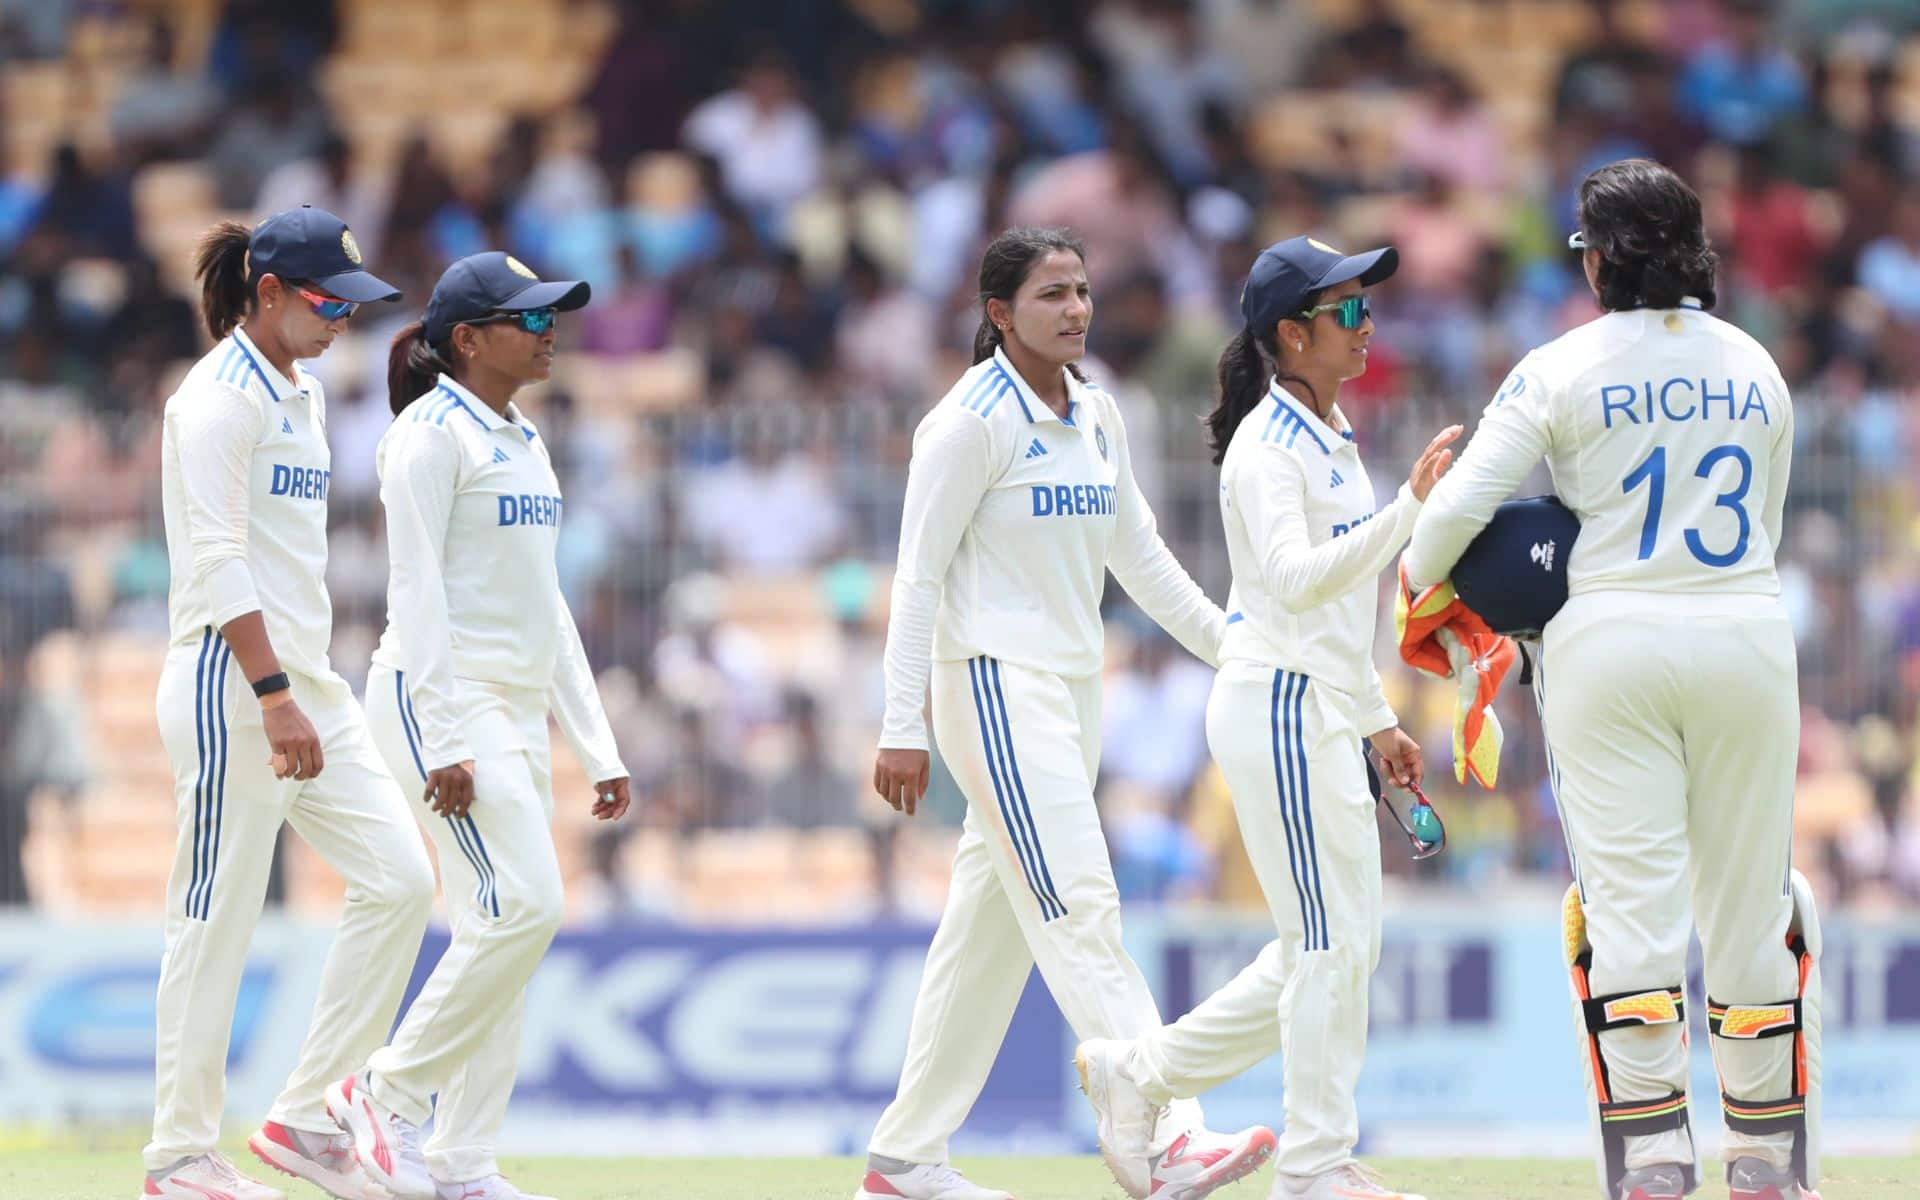 India women lead by 367 runs at the end of Day 2 (BCCI)